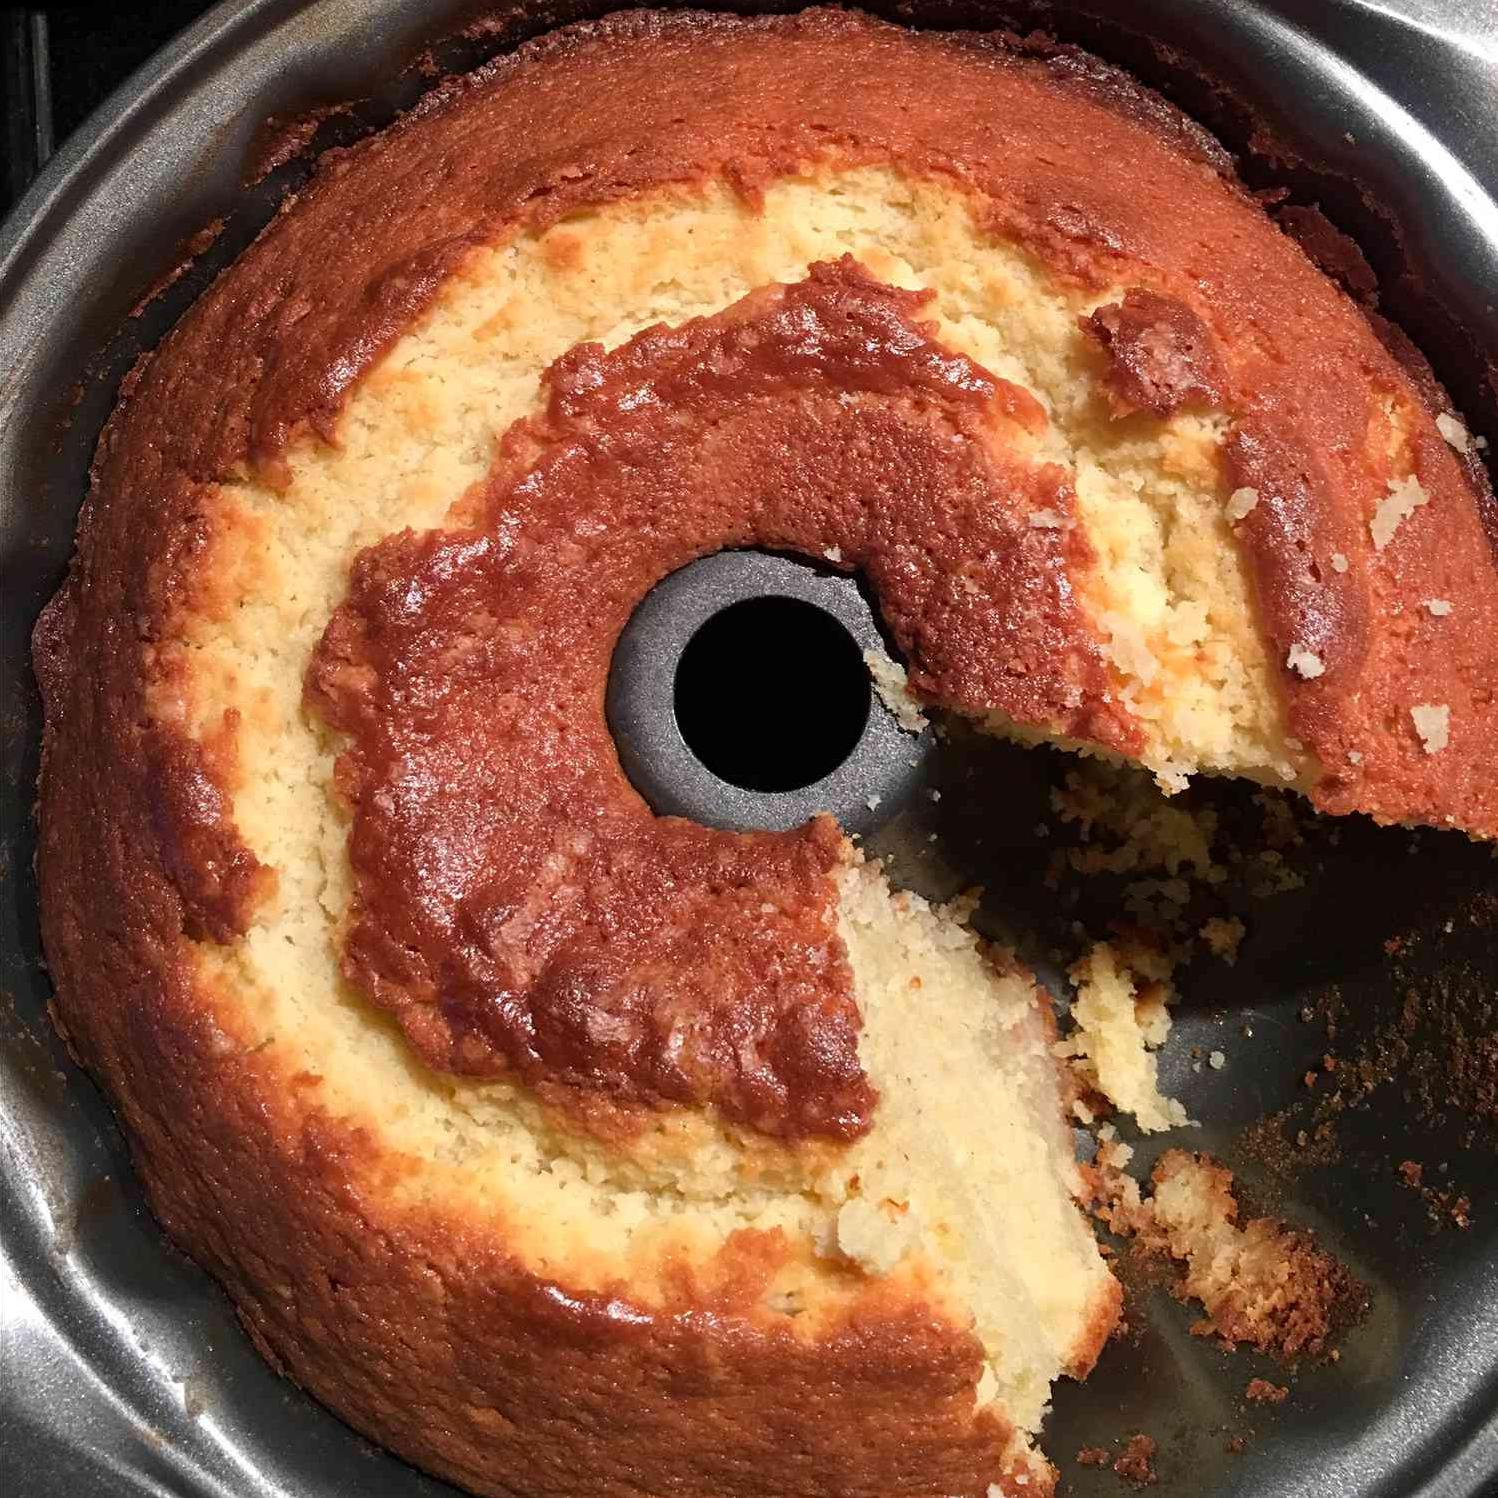  A slice of heaven on a plate, this Vanilla Nut Sour Cream Pound Cake is irresistible.